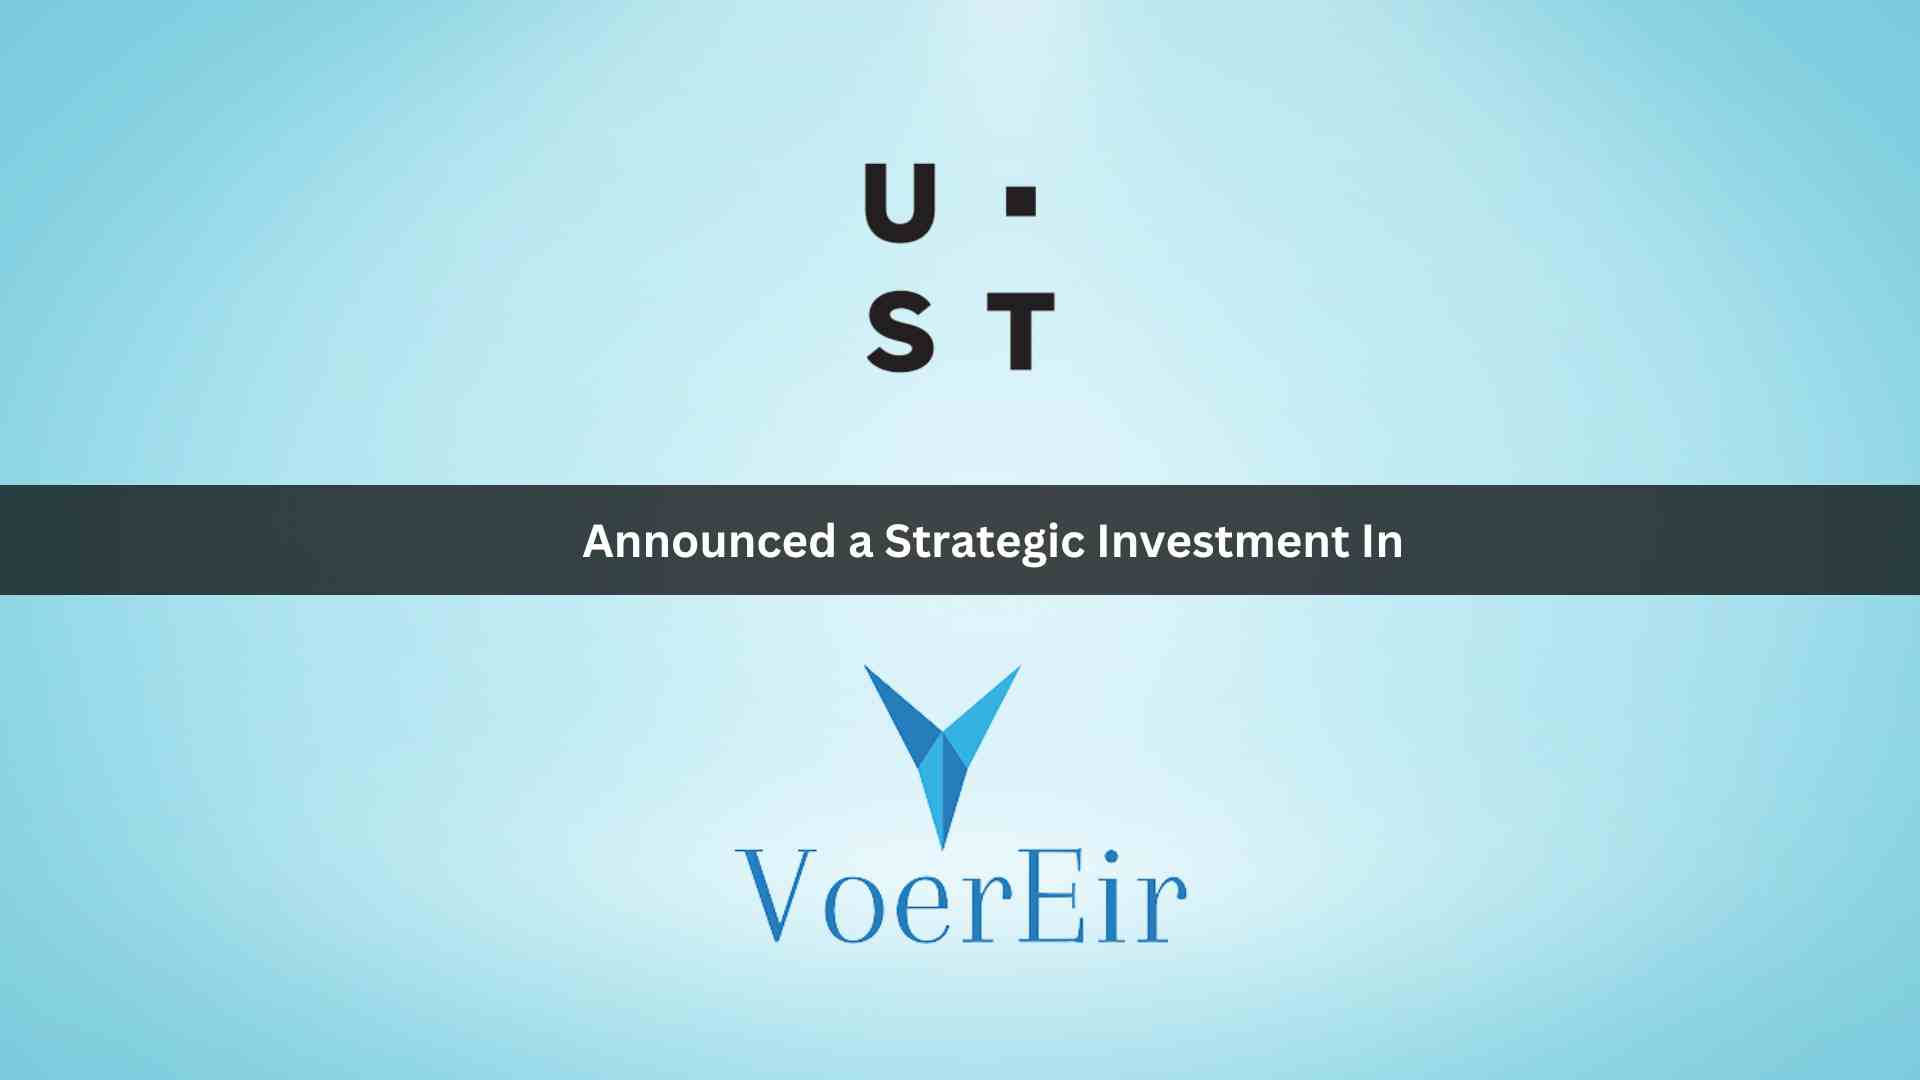 UST Continues Telecoms Sector Growth with Strategic Investment in VoerEir